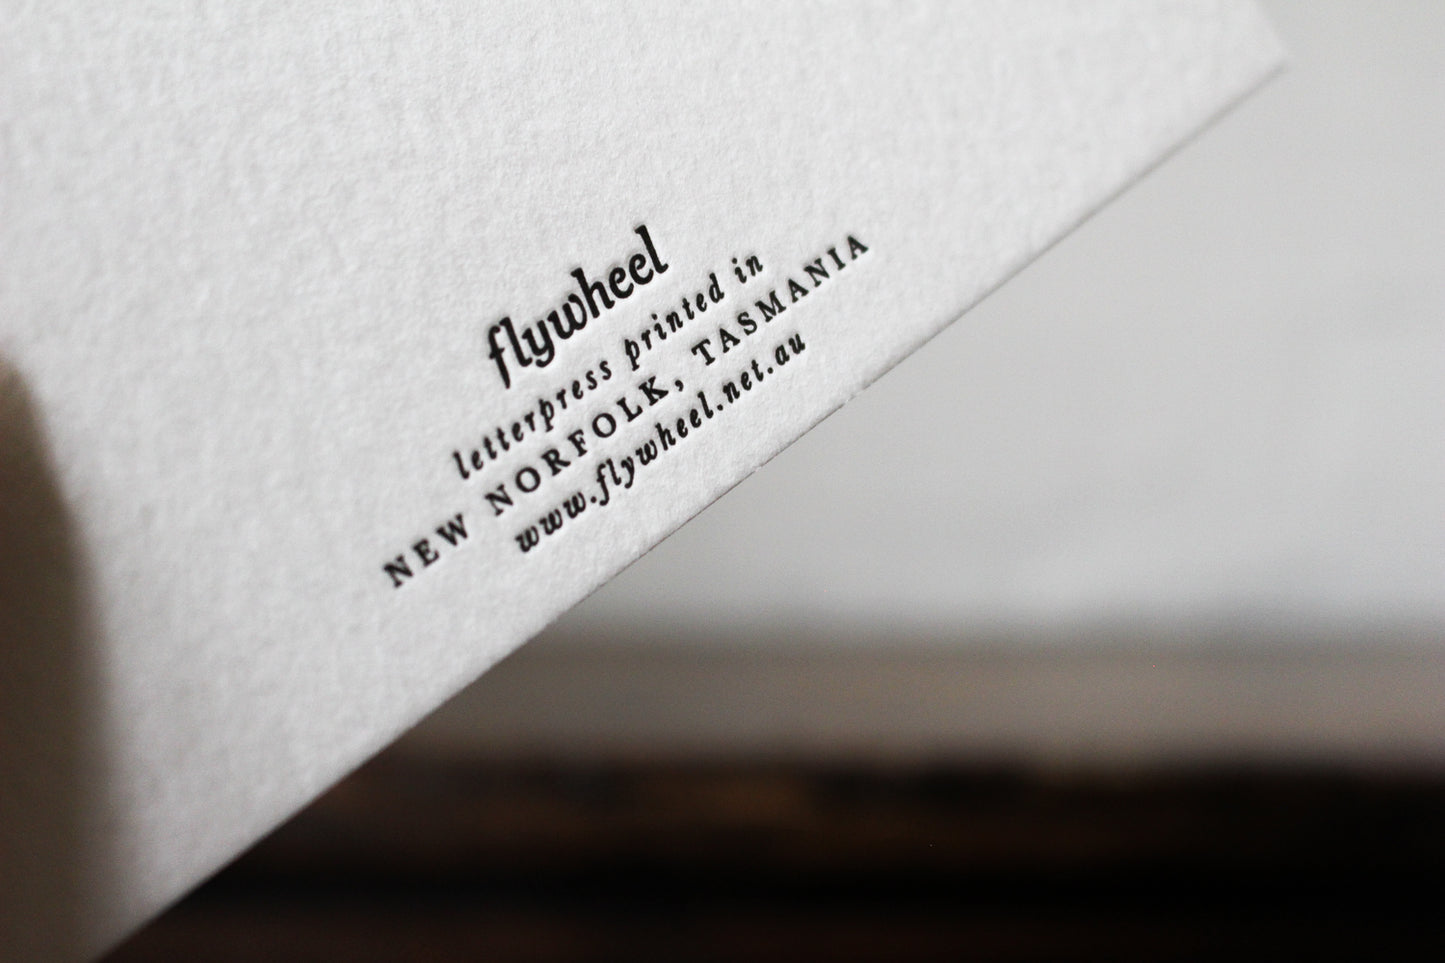 Letterpress Greeting Card - "You mean the world to me" | Flywheel | Stationery | Tasmania